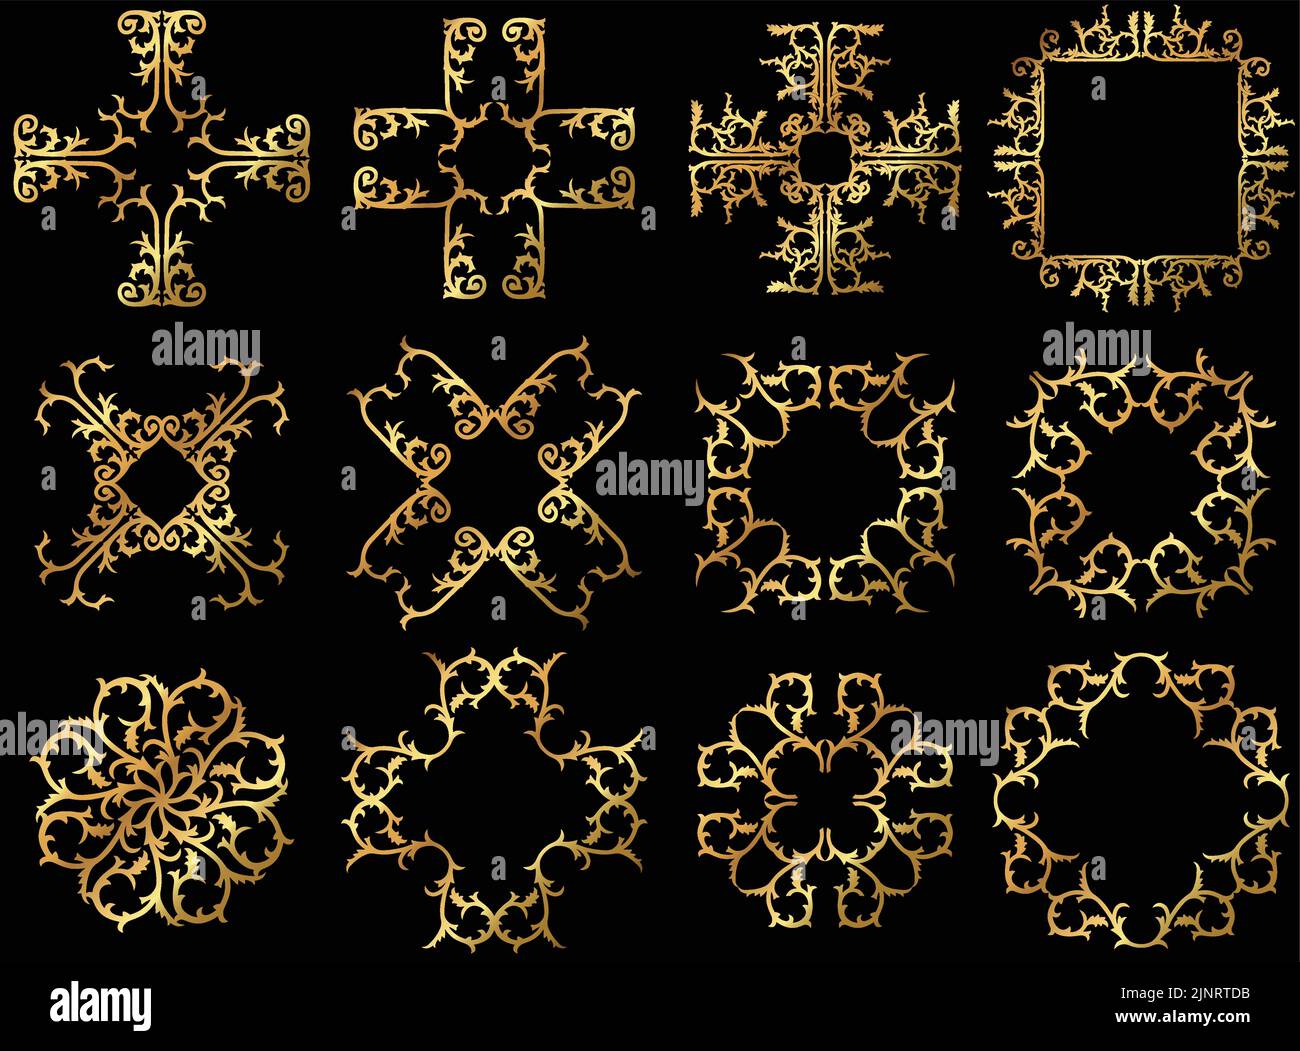 A set of vintage vector gold decorative floral borders and frames. Stock Vector